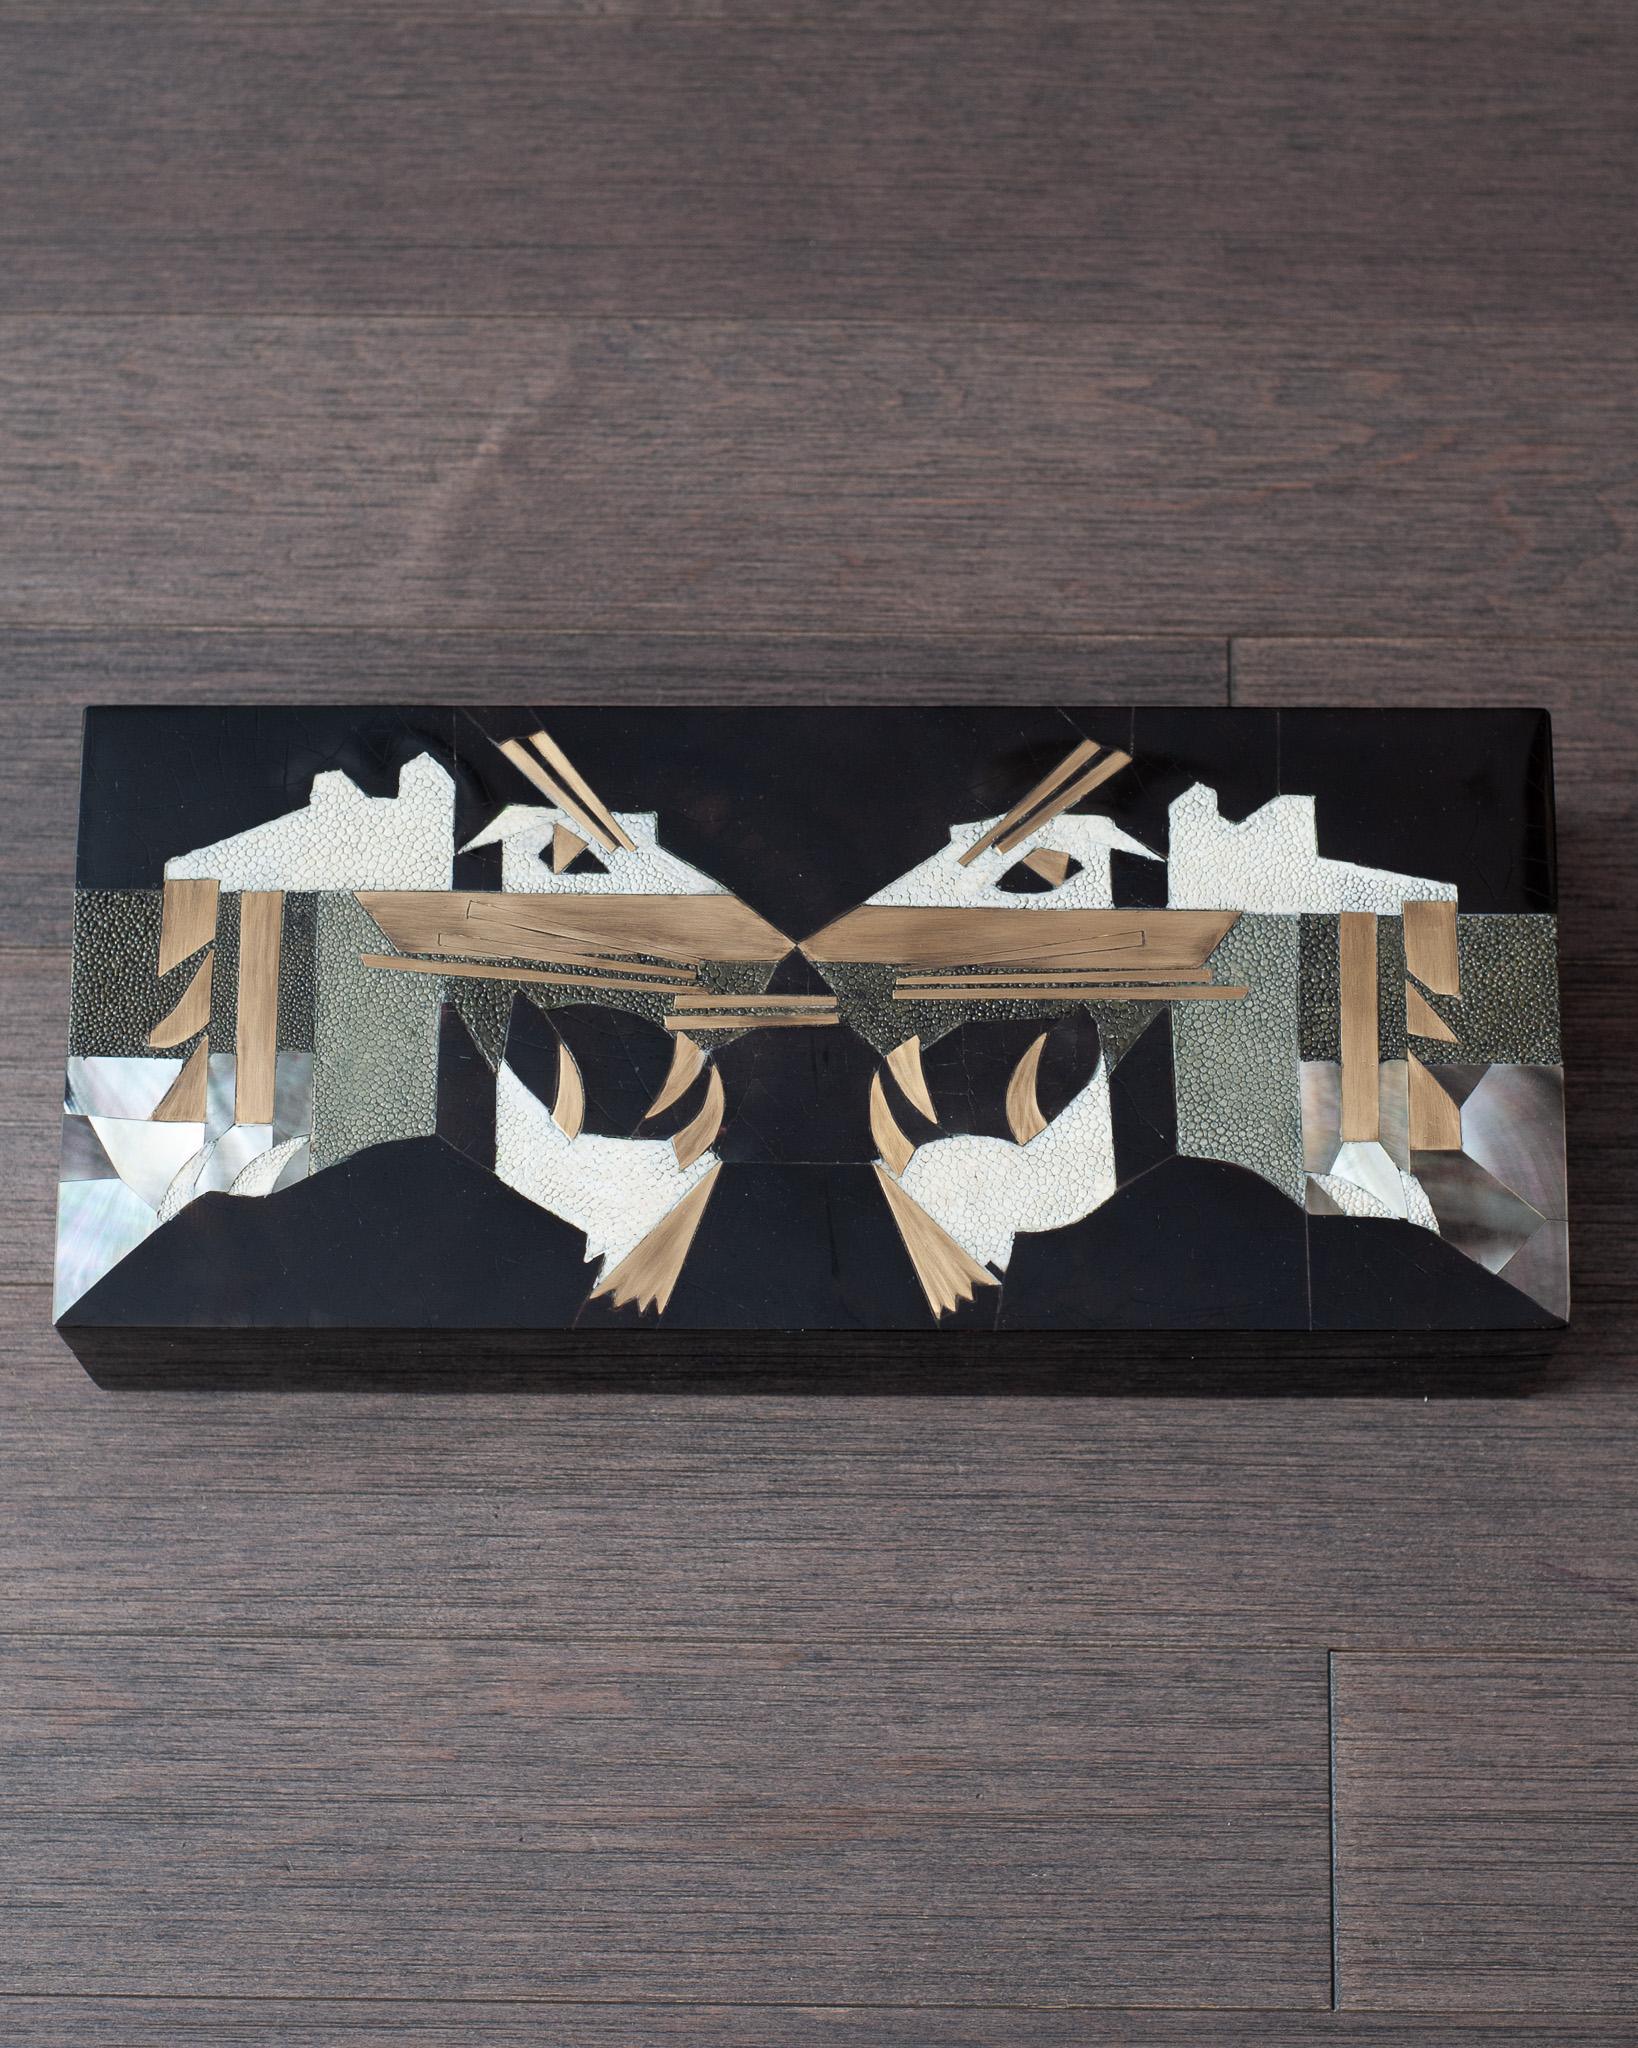 In stock now - A gorgeous Kifu Paris decorative box in black penshell over a base of walnut, with brass, creme & grey shagreen, and black mother of pearl inlay lid. Expertly crafted in a double panther motif, this decorative box is a perfect